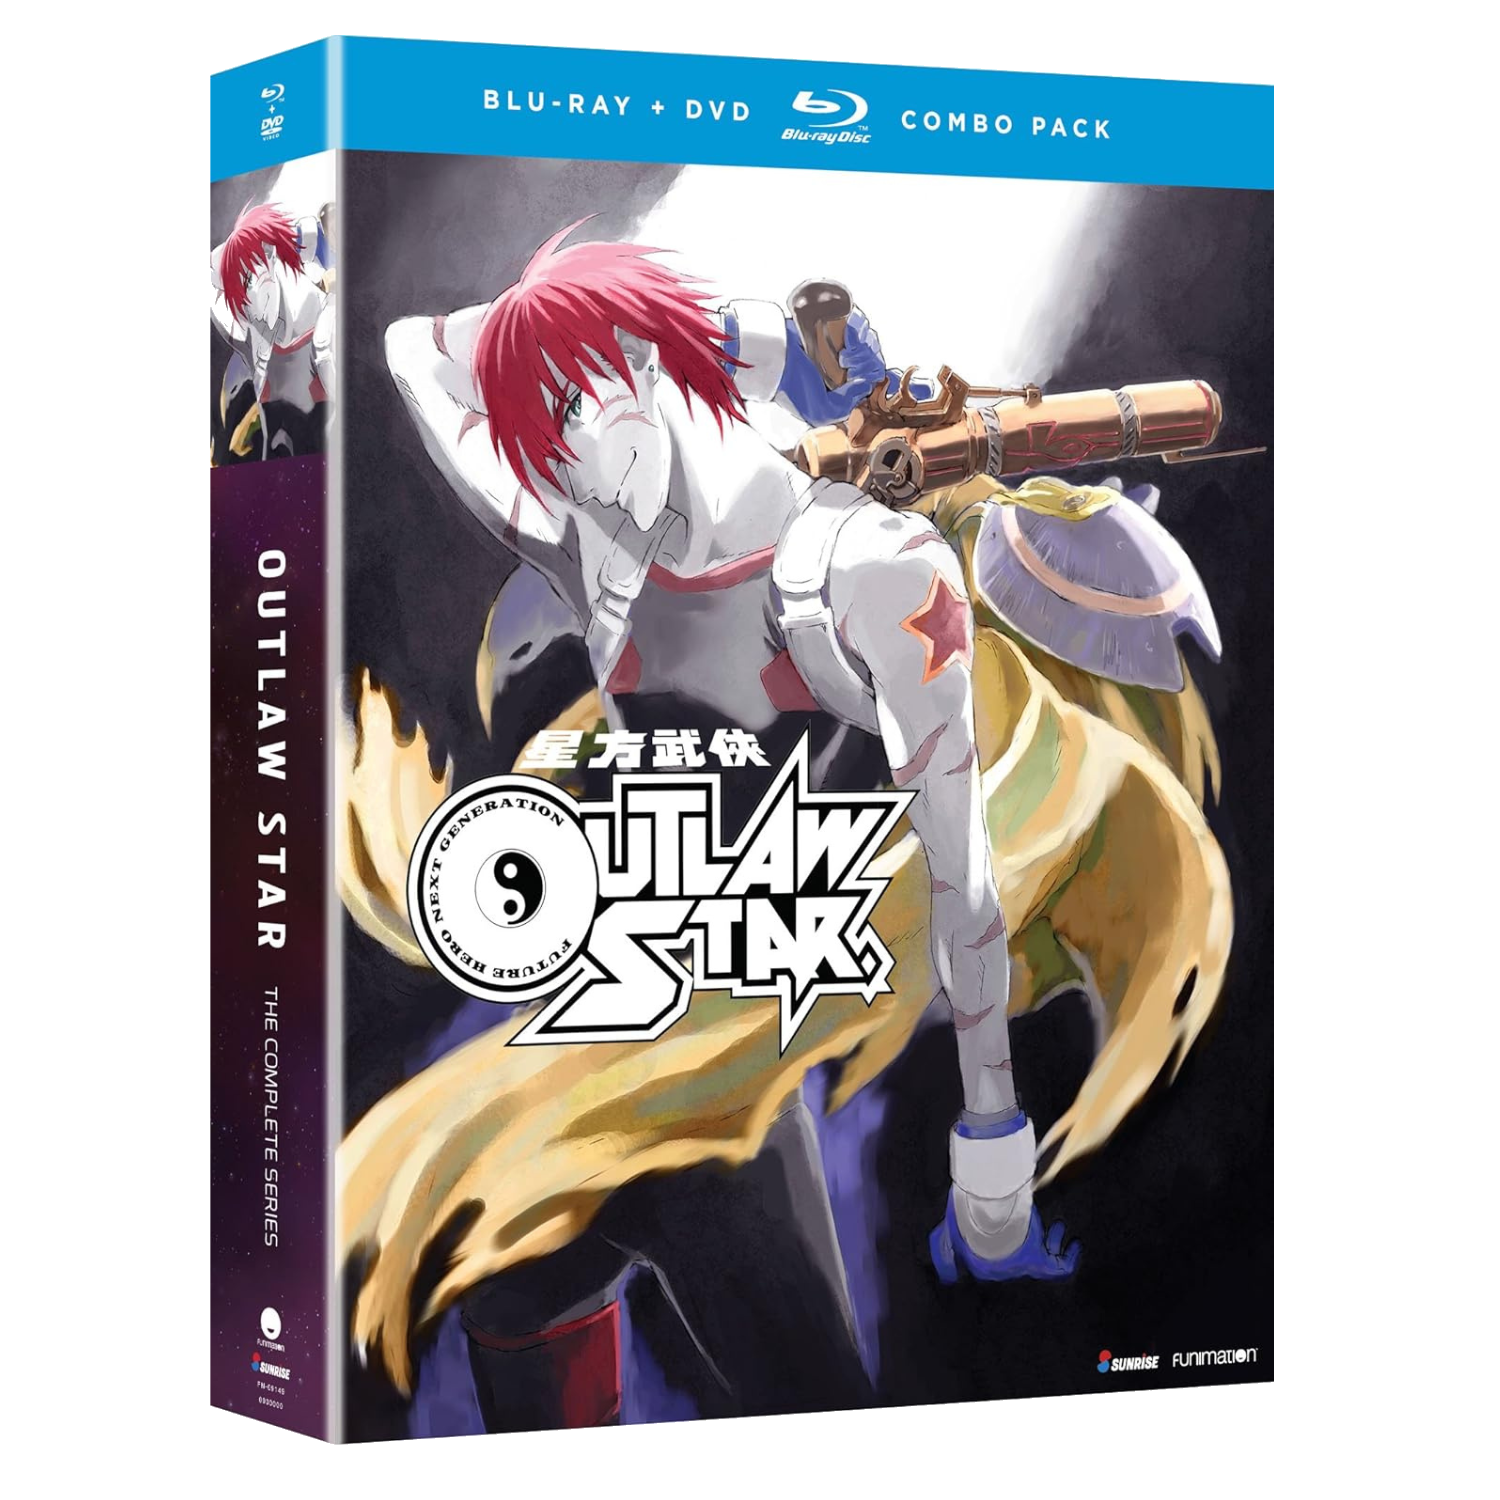 Avex Pictures Reveals 1st 'Heavenly Delusion' TV Anime Blu-ray Box Sets  Promo